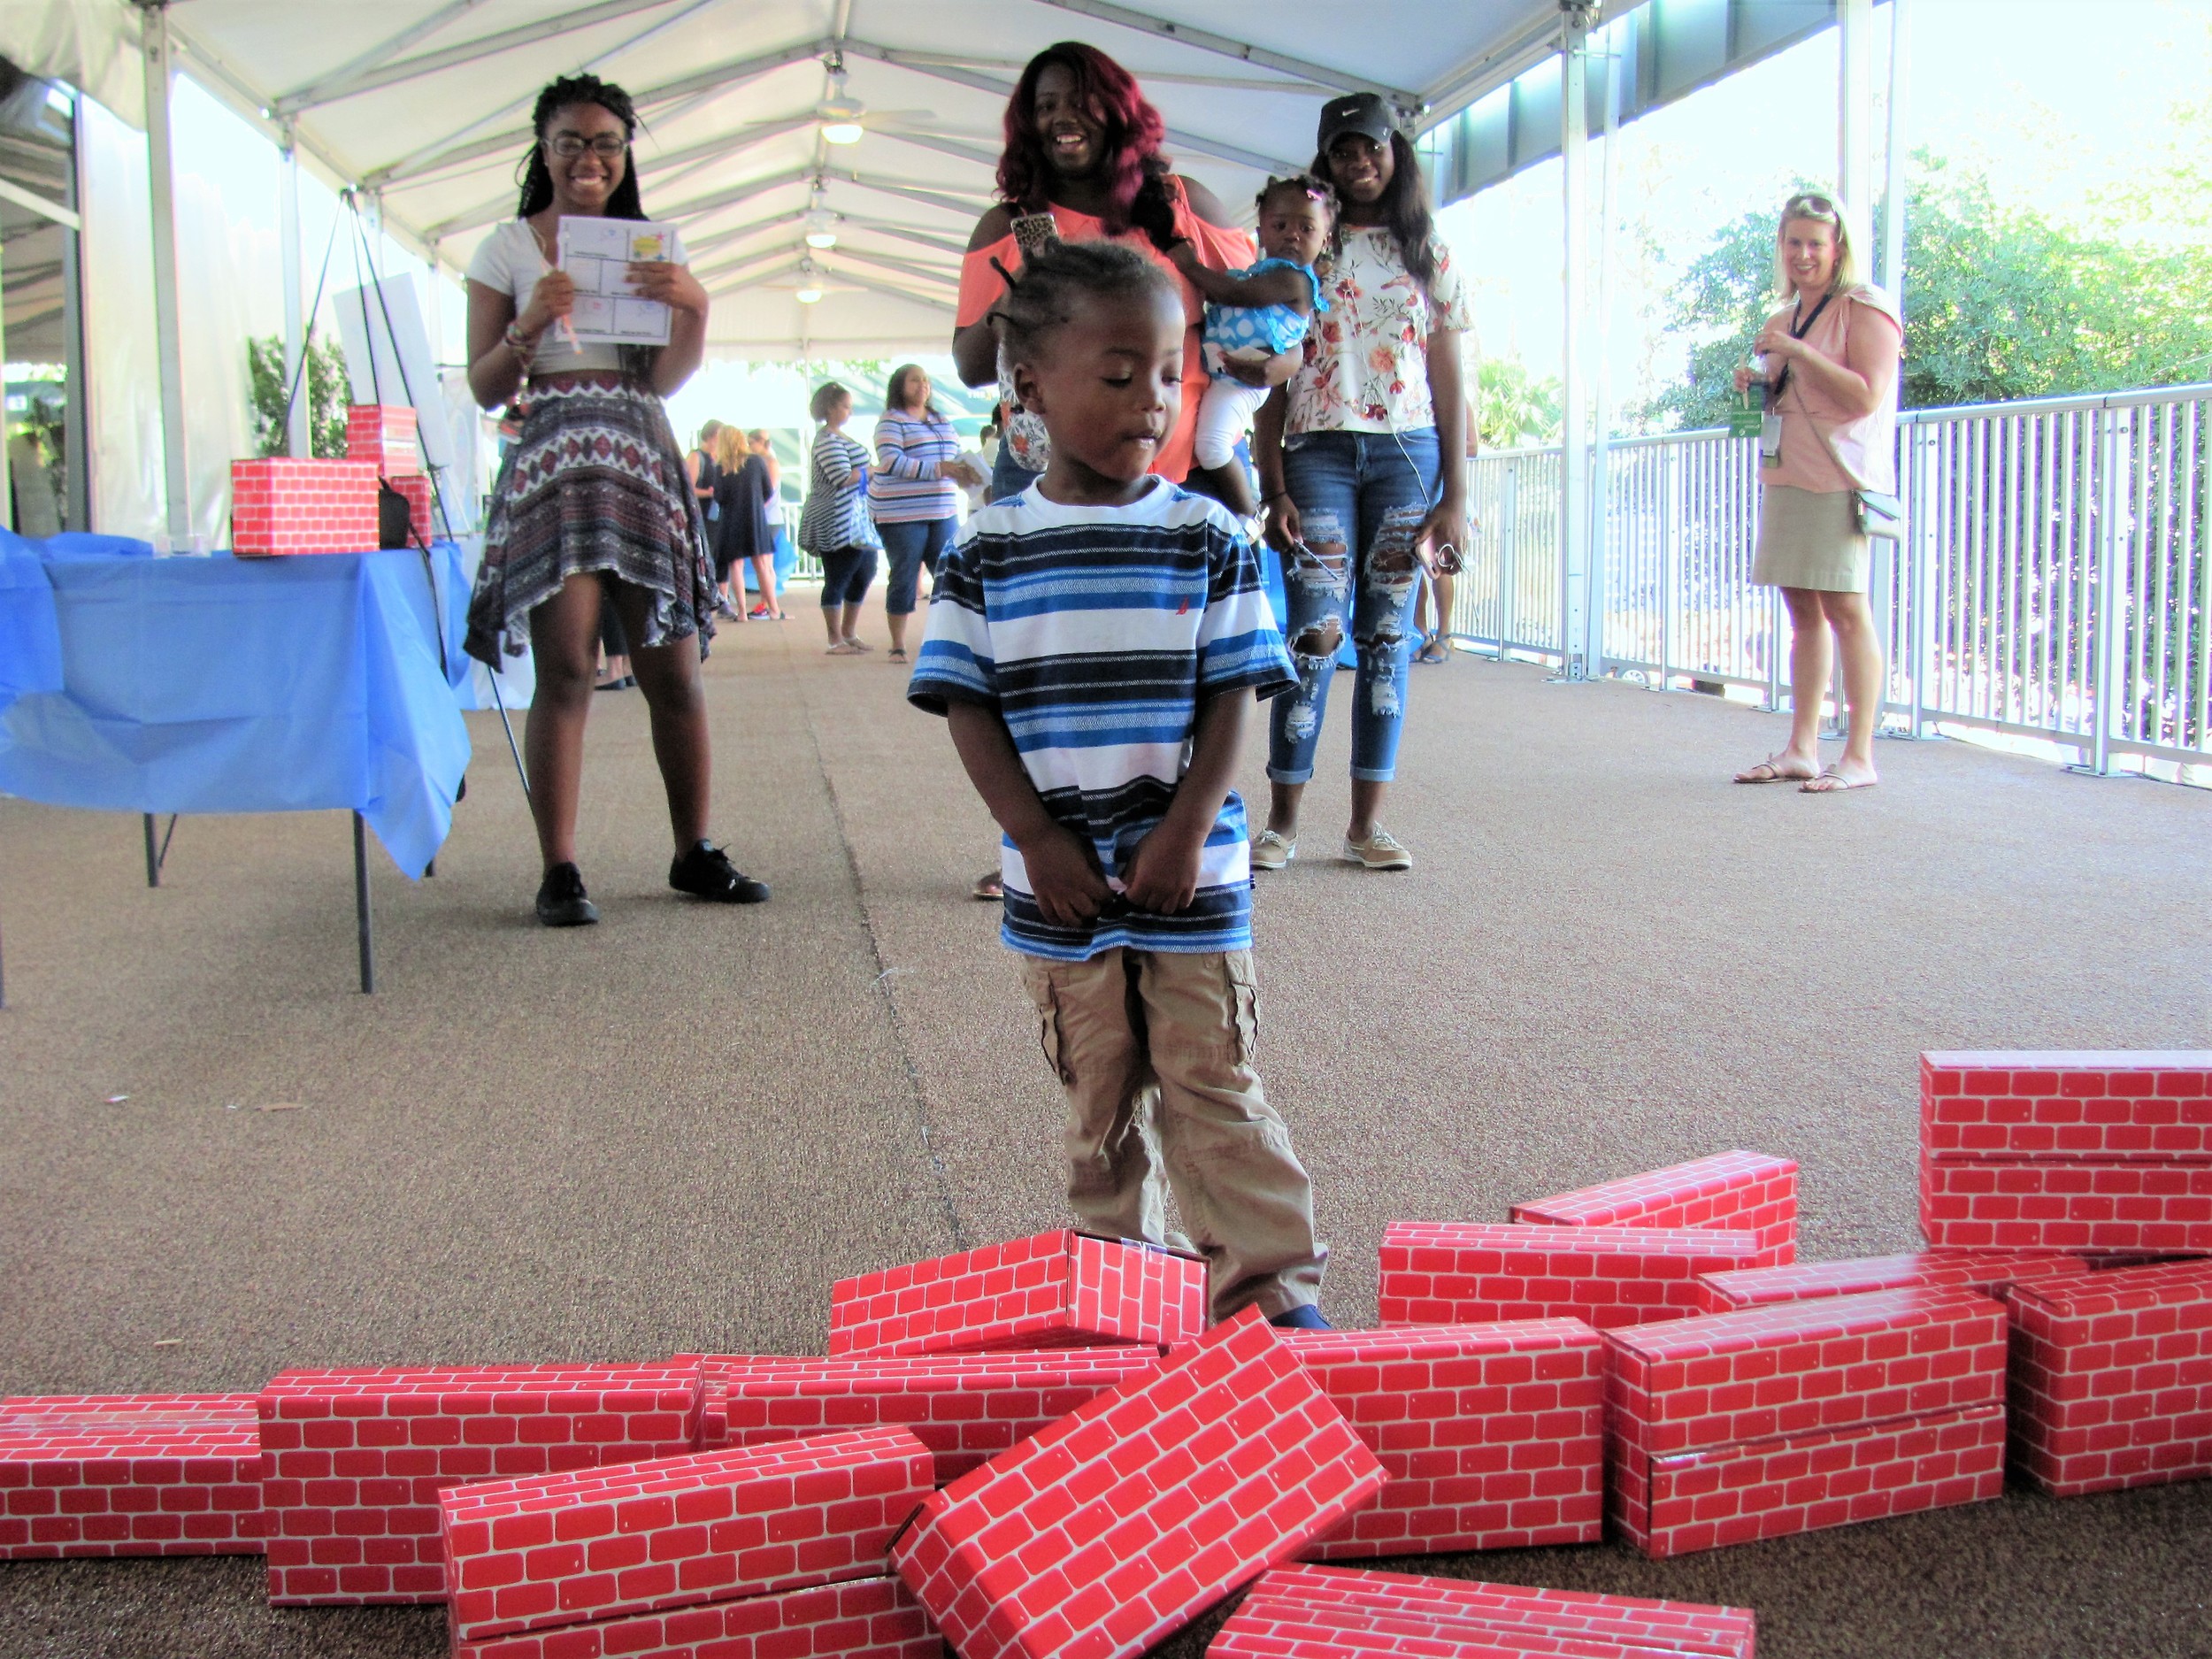 One of the children at the event kicks over a stack of blocks.